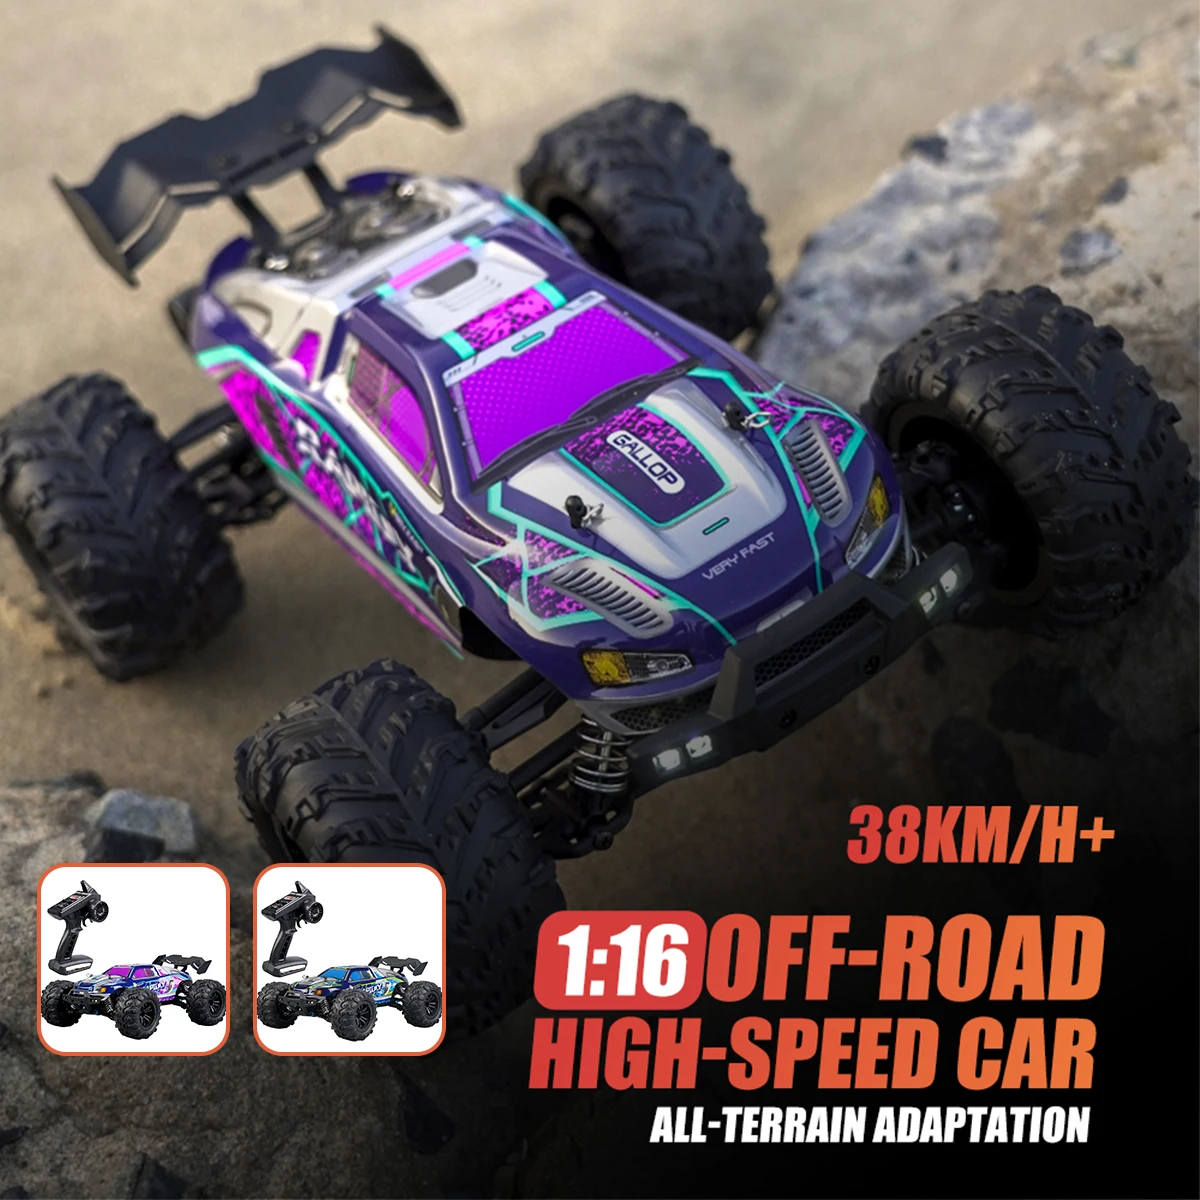 2.4G RC Car 1/16 Off Road 4x4 Car Rc Truck 38Km/h Radio Controlled 4WD Race Vehicle Remote Control Cars Toys for Childre enlarge